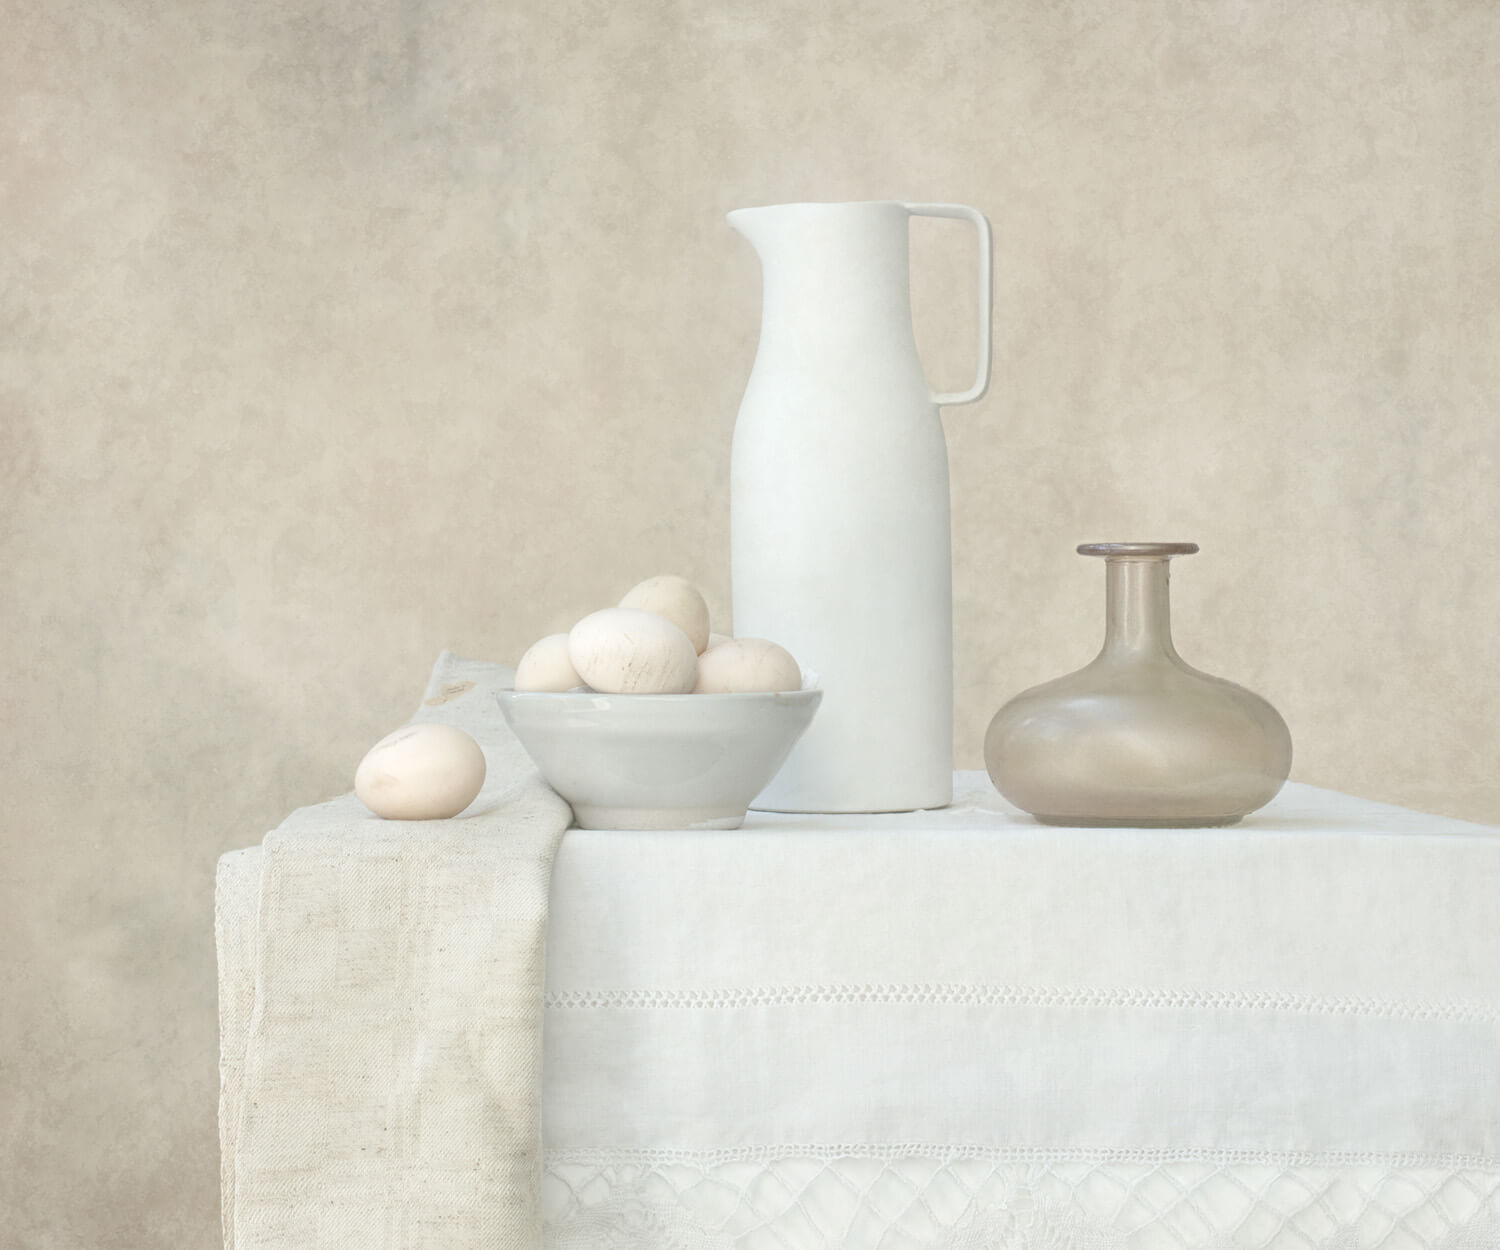 A serene still life photograph depicts a white ceramic pitcher, a bowl filled with eggs, and a small brown vase arranged thoughtfully on a table covered with a white lace-edged tablecloth. The textured background in neutral tones adds a warm, vintage ambiance to the scene, emphasizing the simplicity and beauty of the objects.